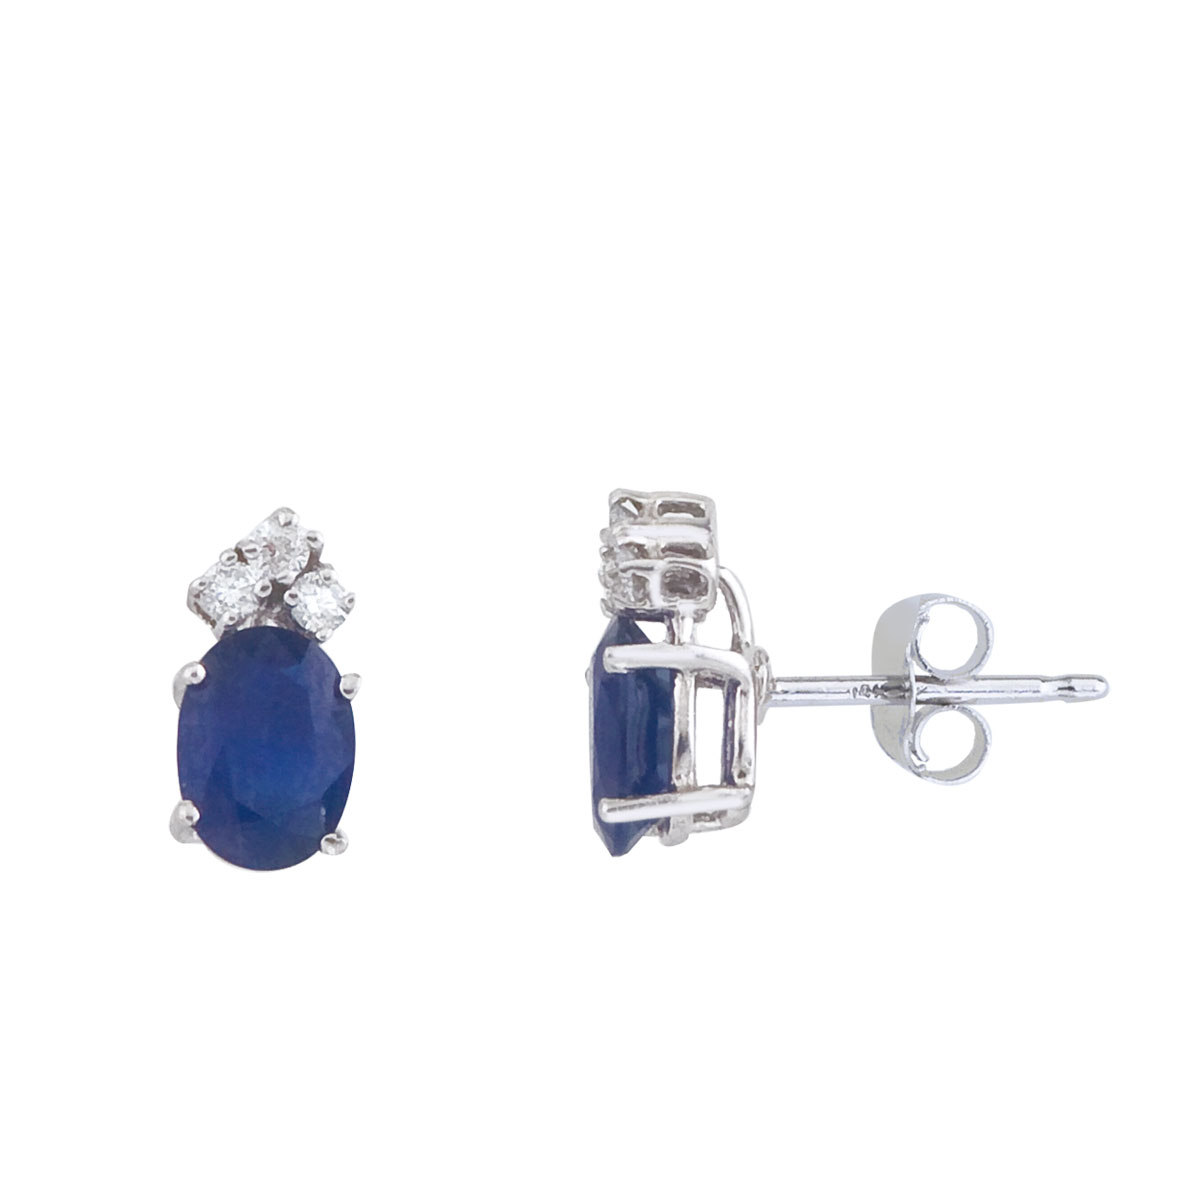 JCX2249: These 7x5 mm oval shaped sapphire earrings are set in beautiful 14k white gold and feature .12 total carat diamonds.